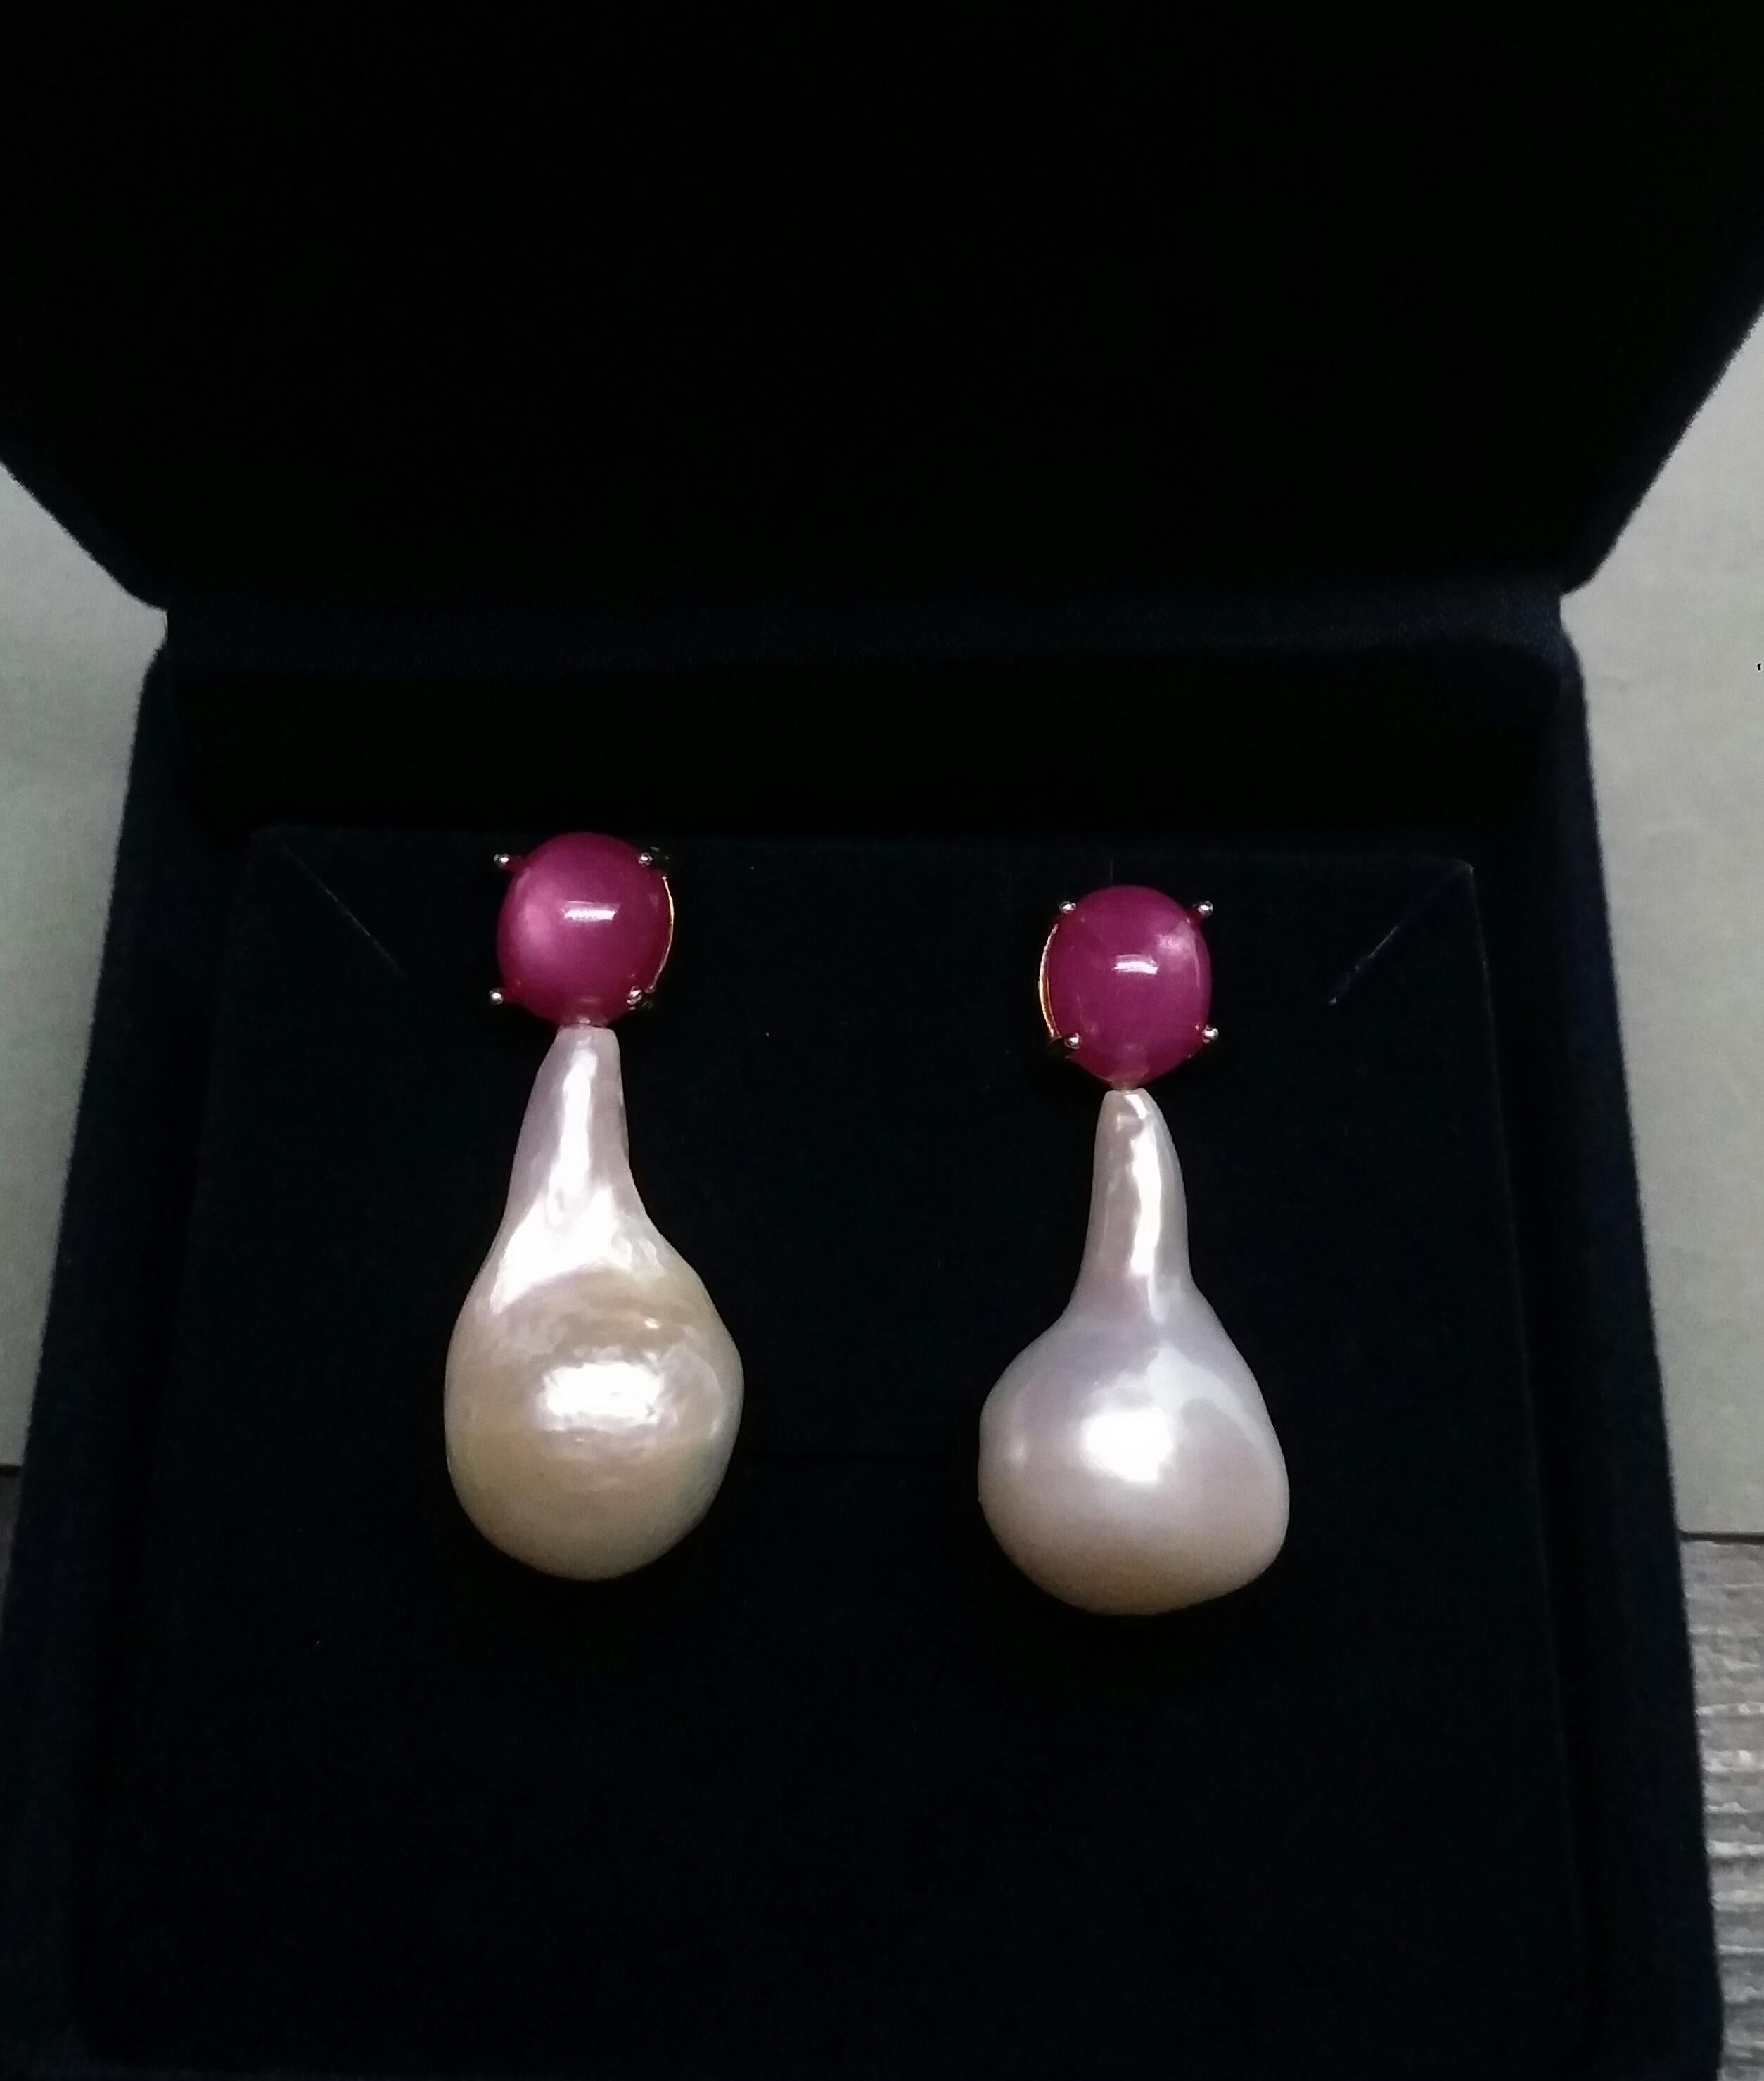 Big Size Pear Shape Baroque Pearls Oval Ruby Cabochon 14 Karat Gold Earrings For Sale 4